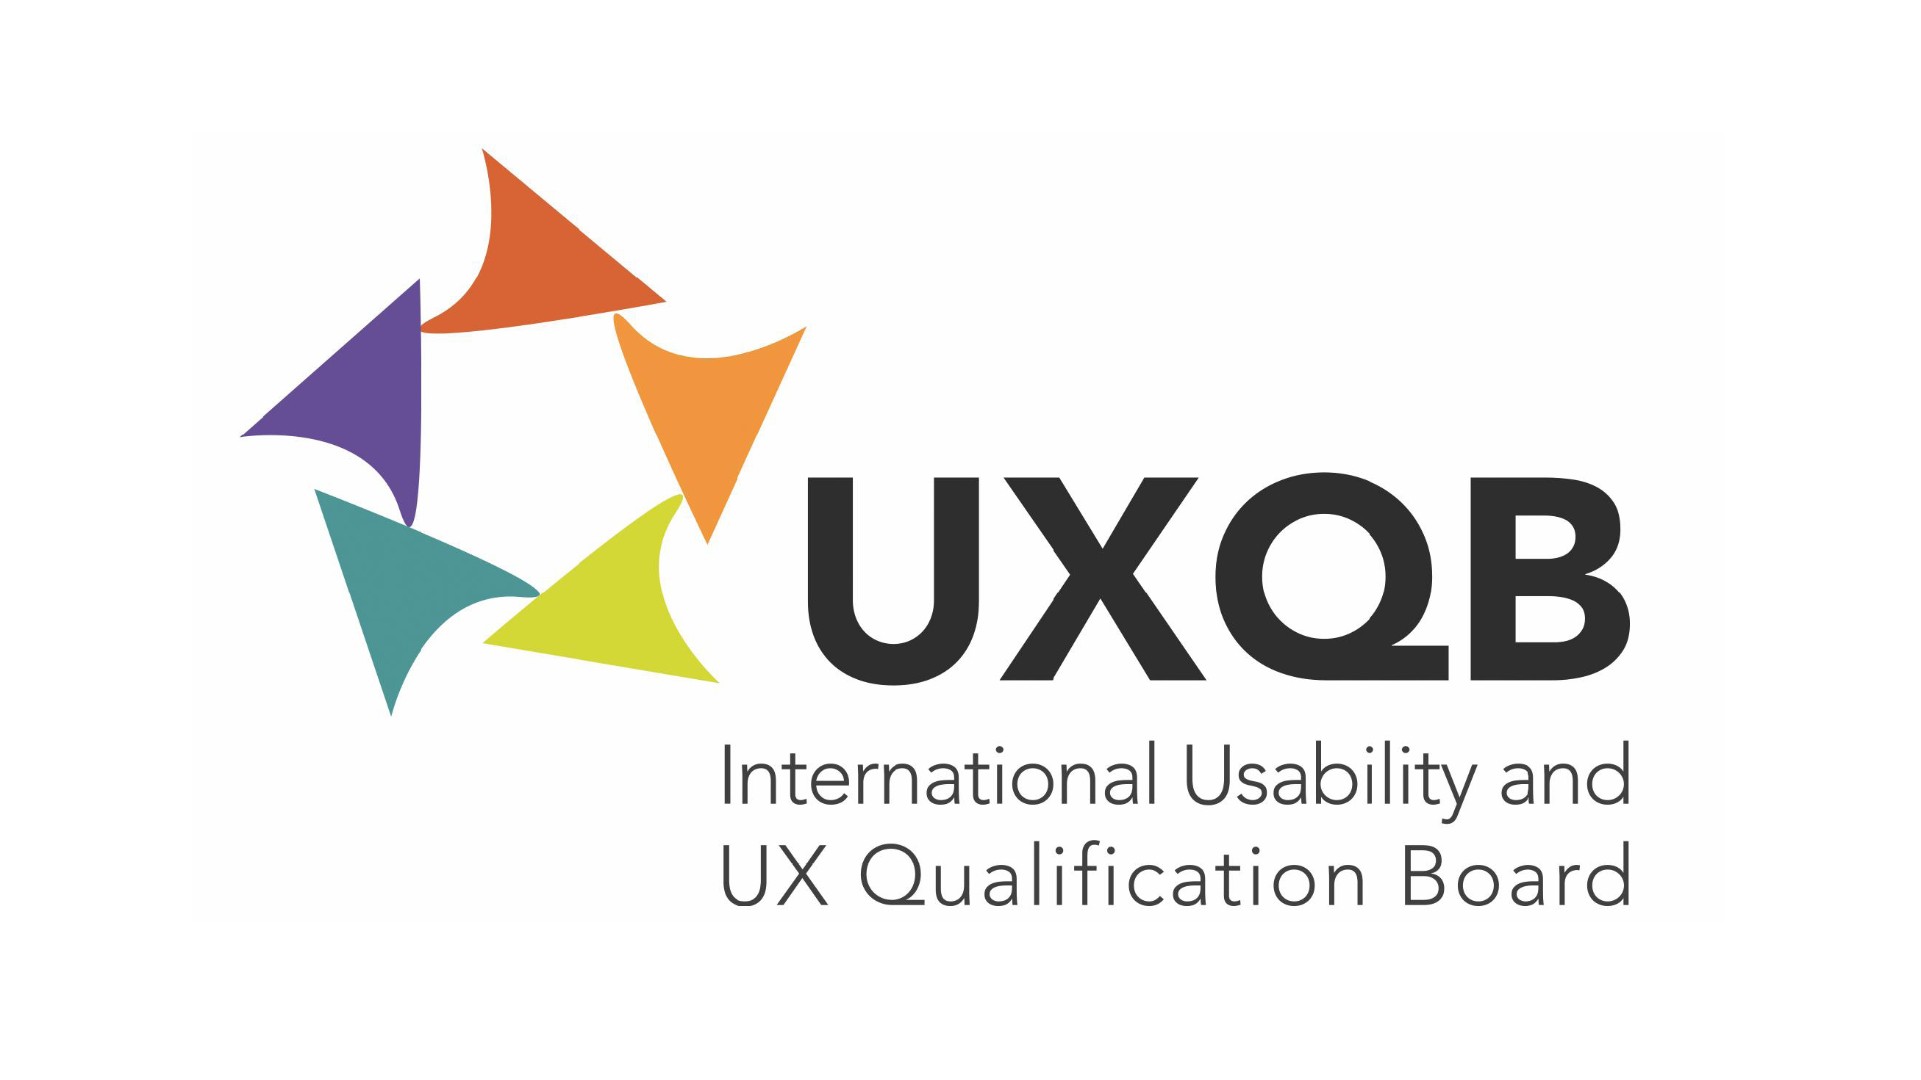 International Usability and UX Qualification Board